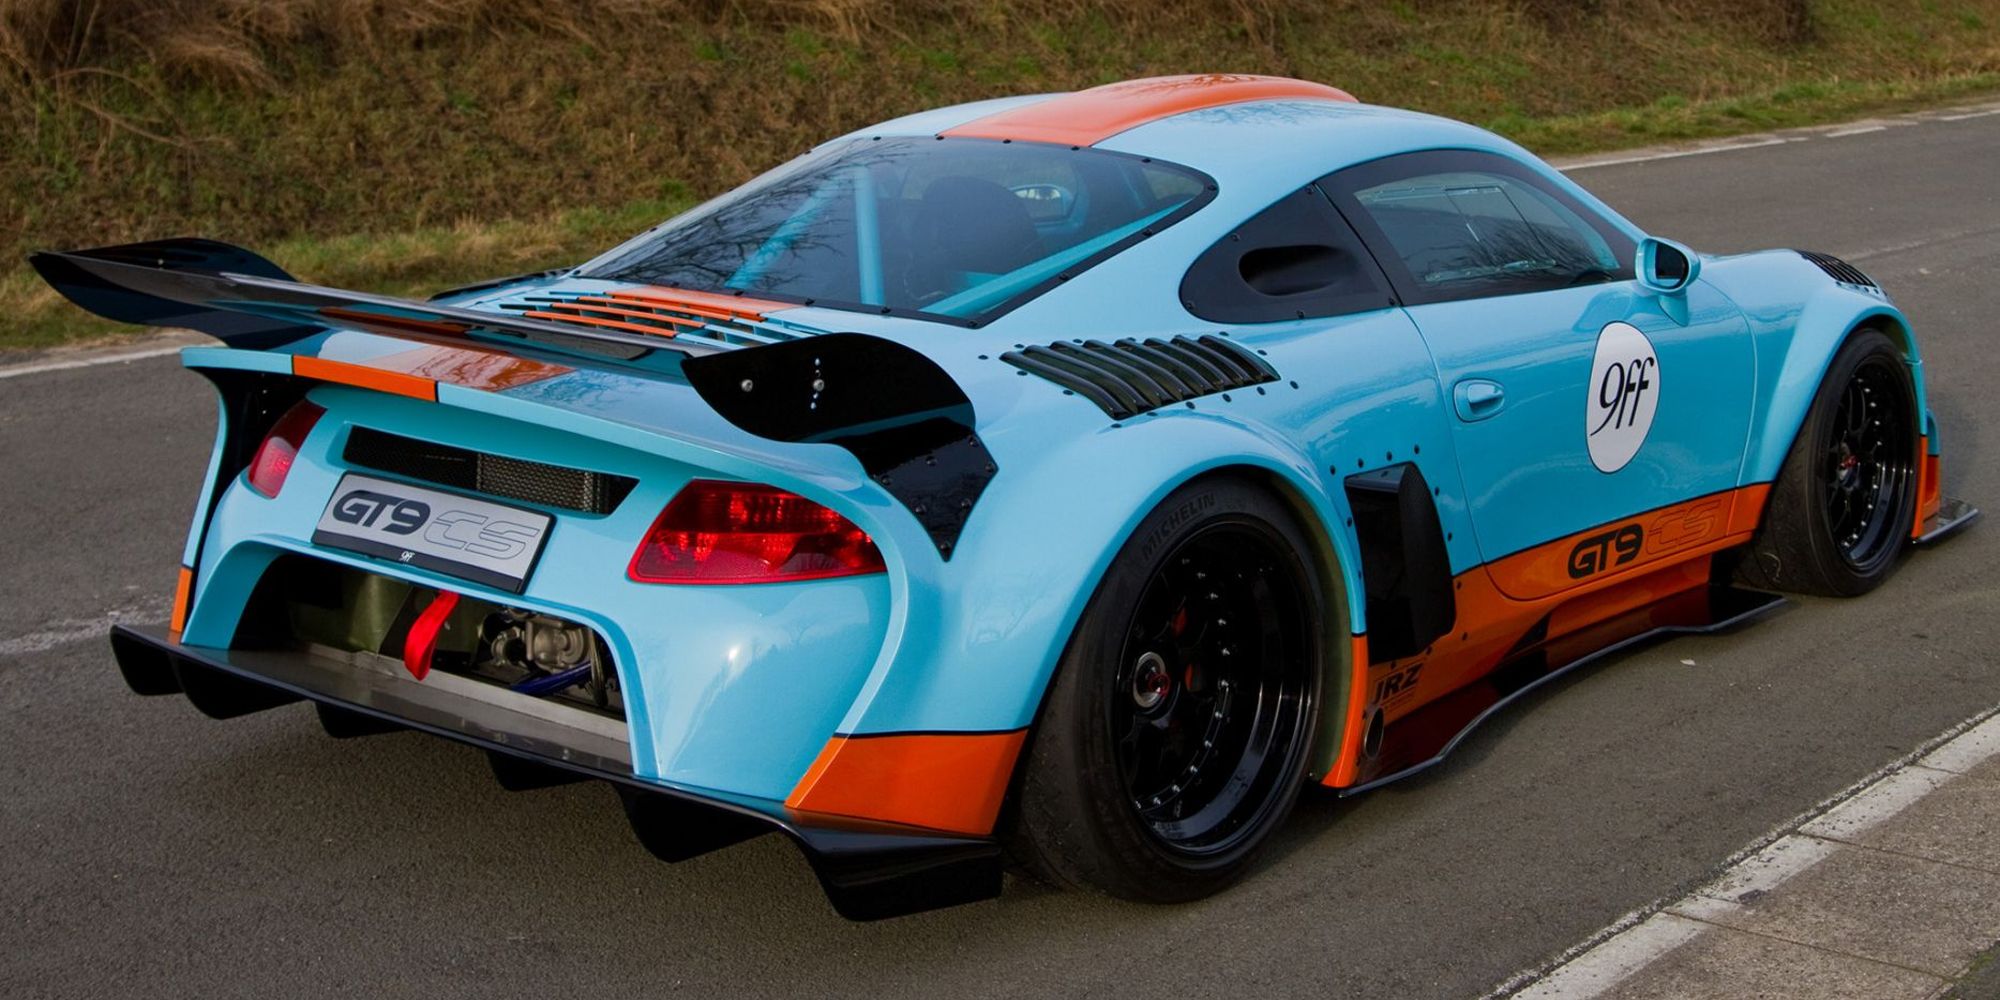 The rear of the GT9 CS